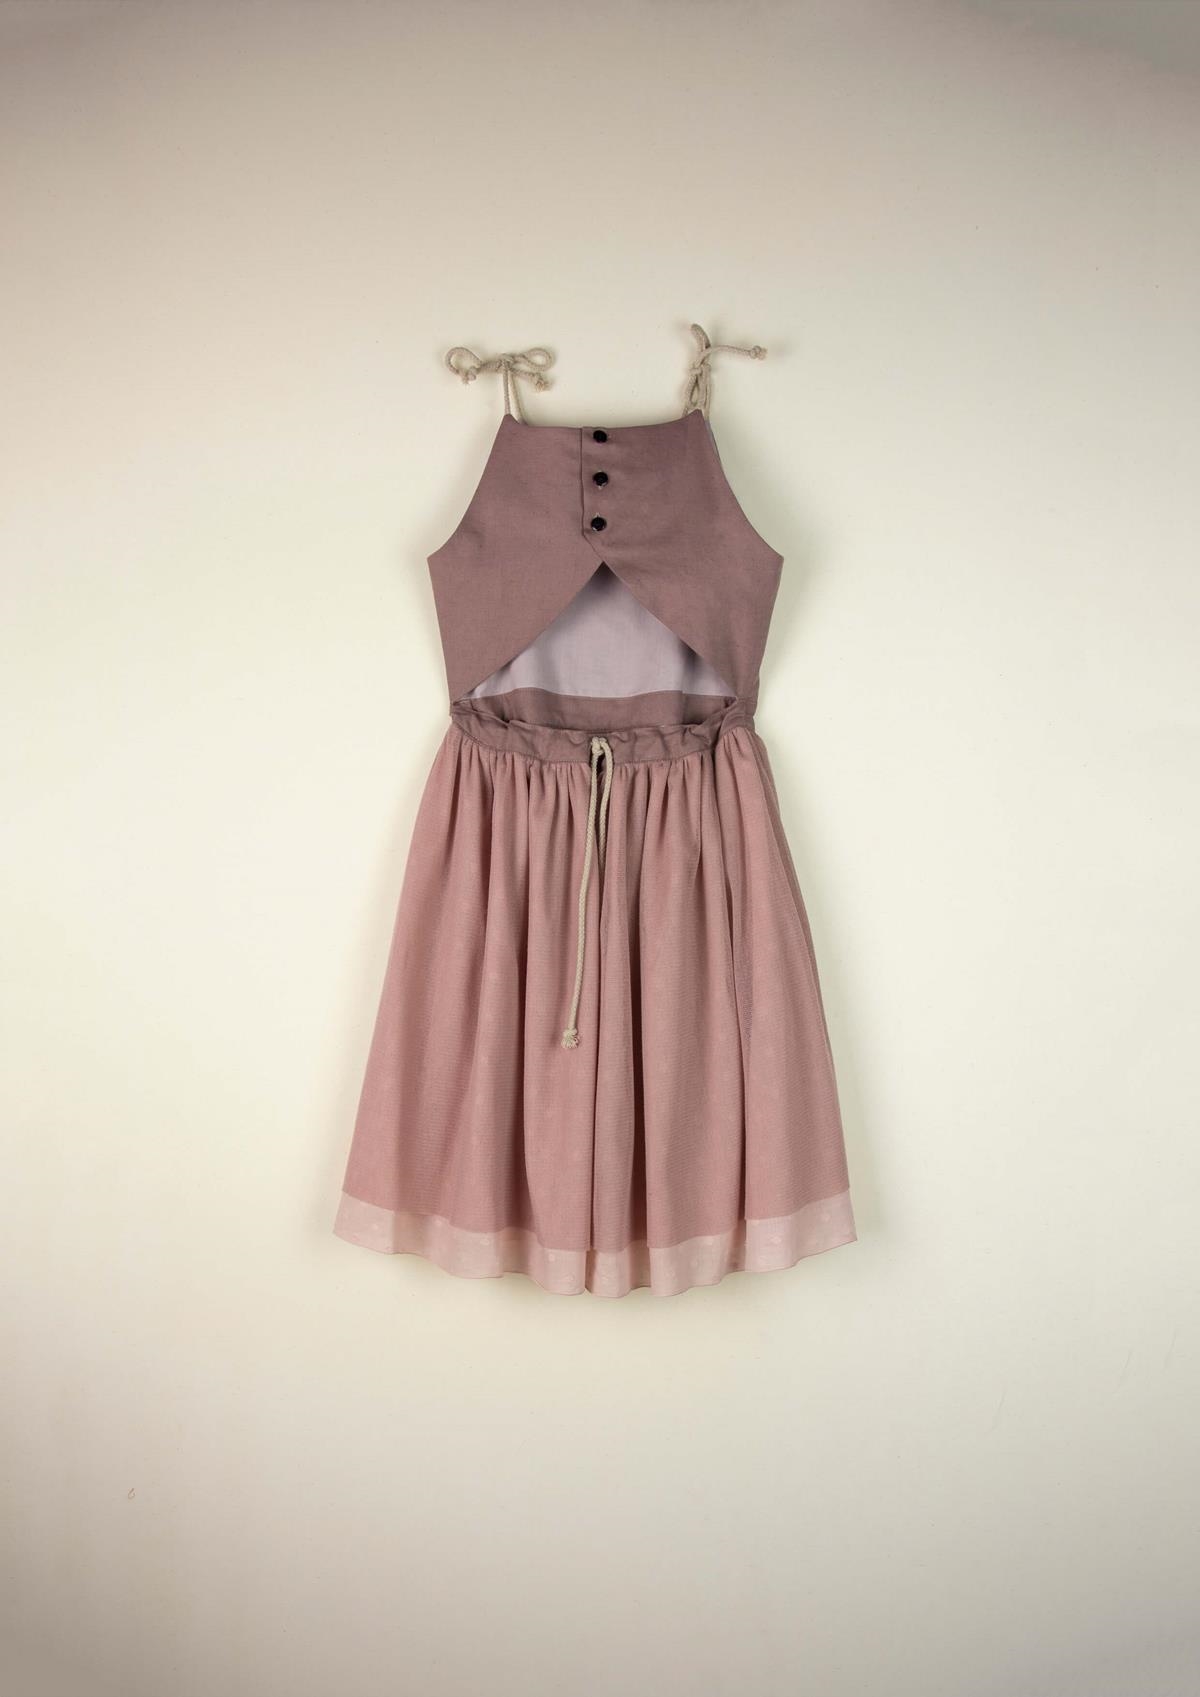 Mod.29.1 Pink dress with straps | SS21Mod.29.1 Pink dress with straps | 1